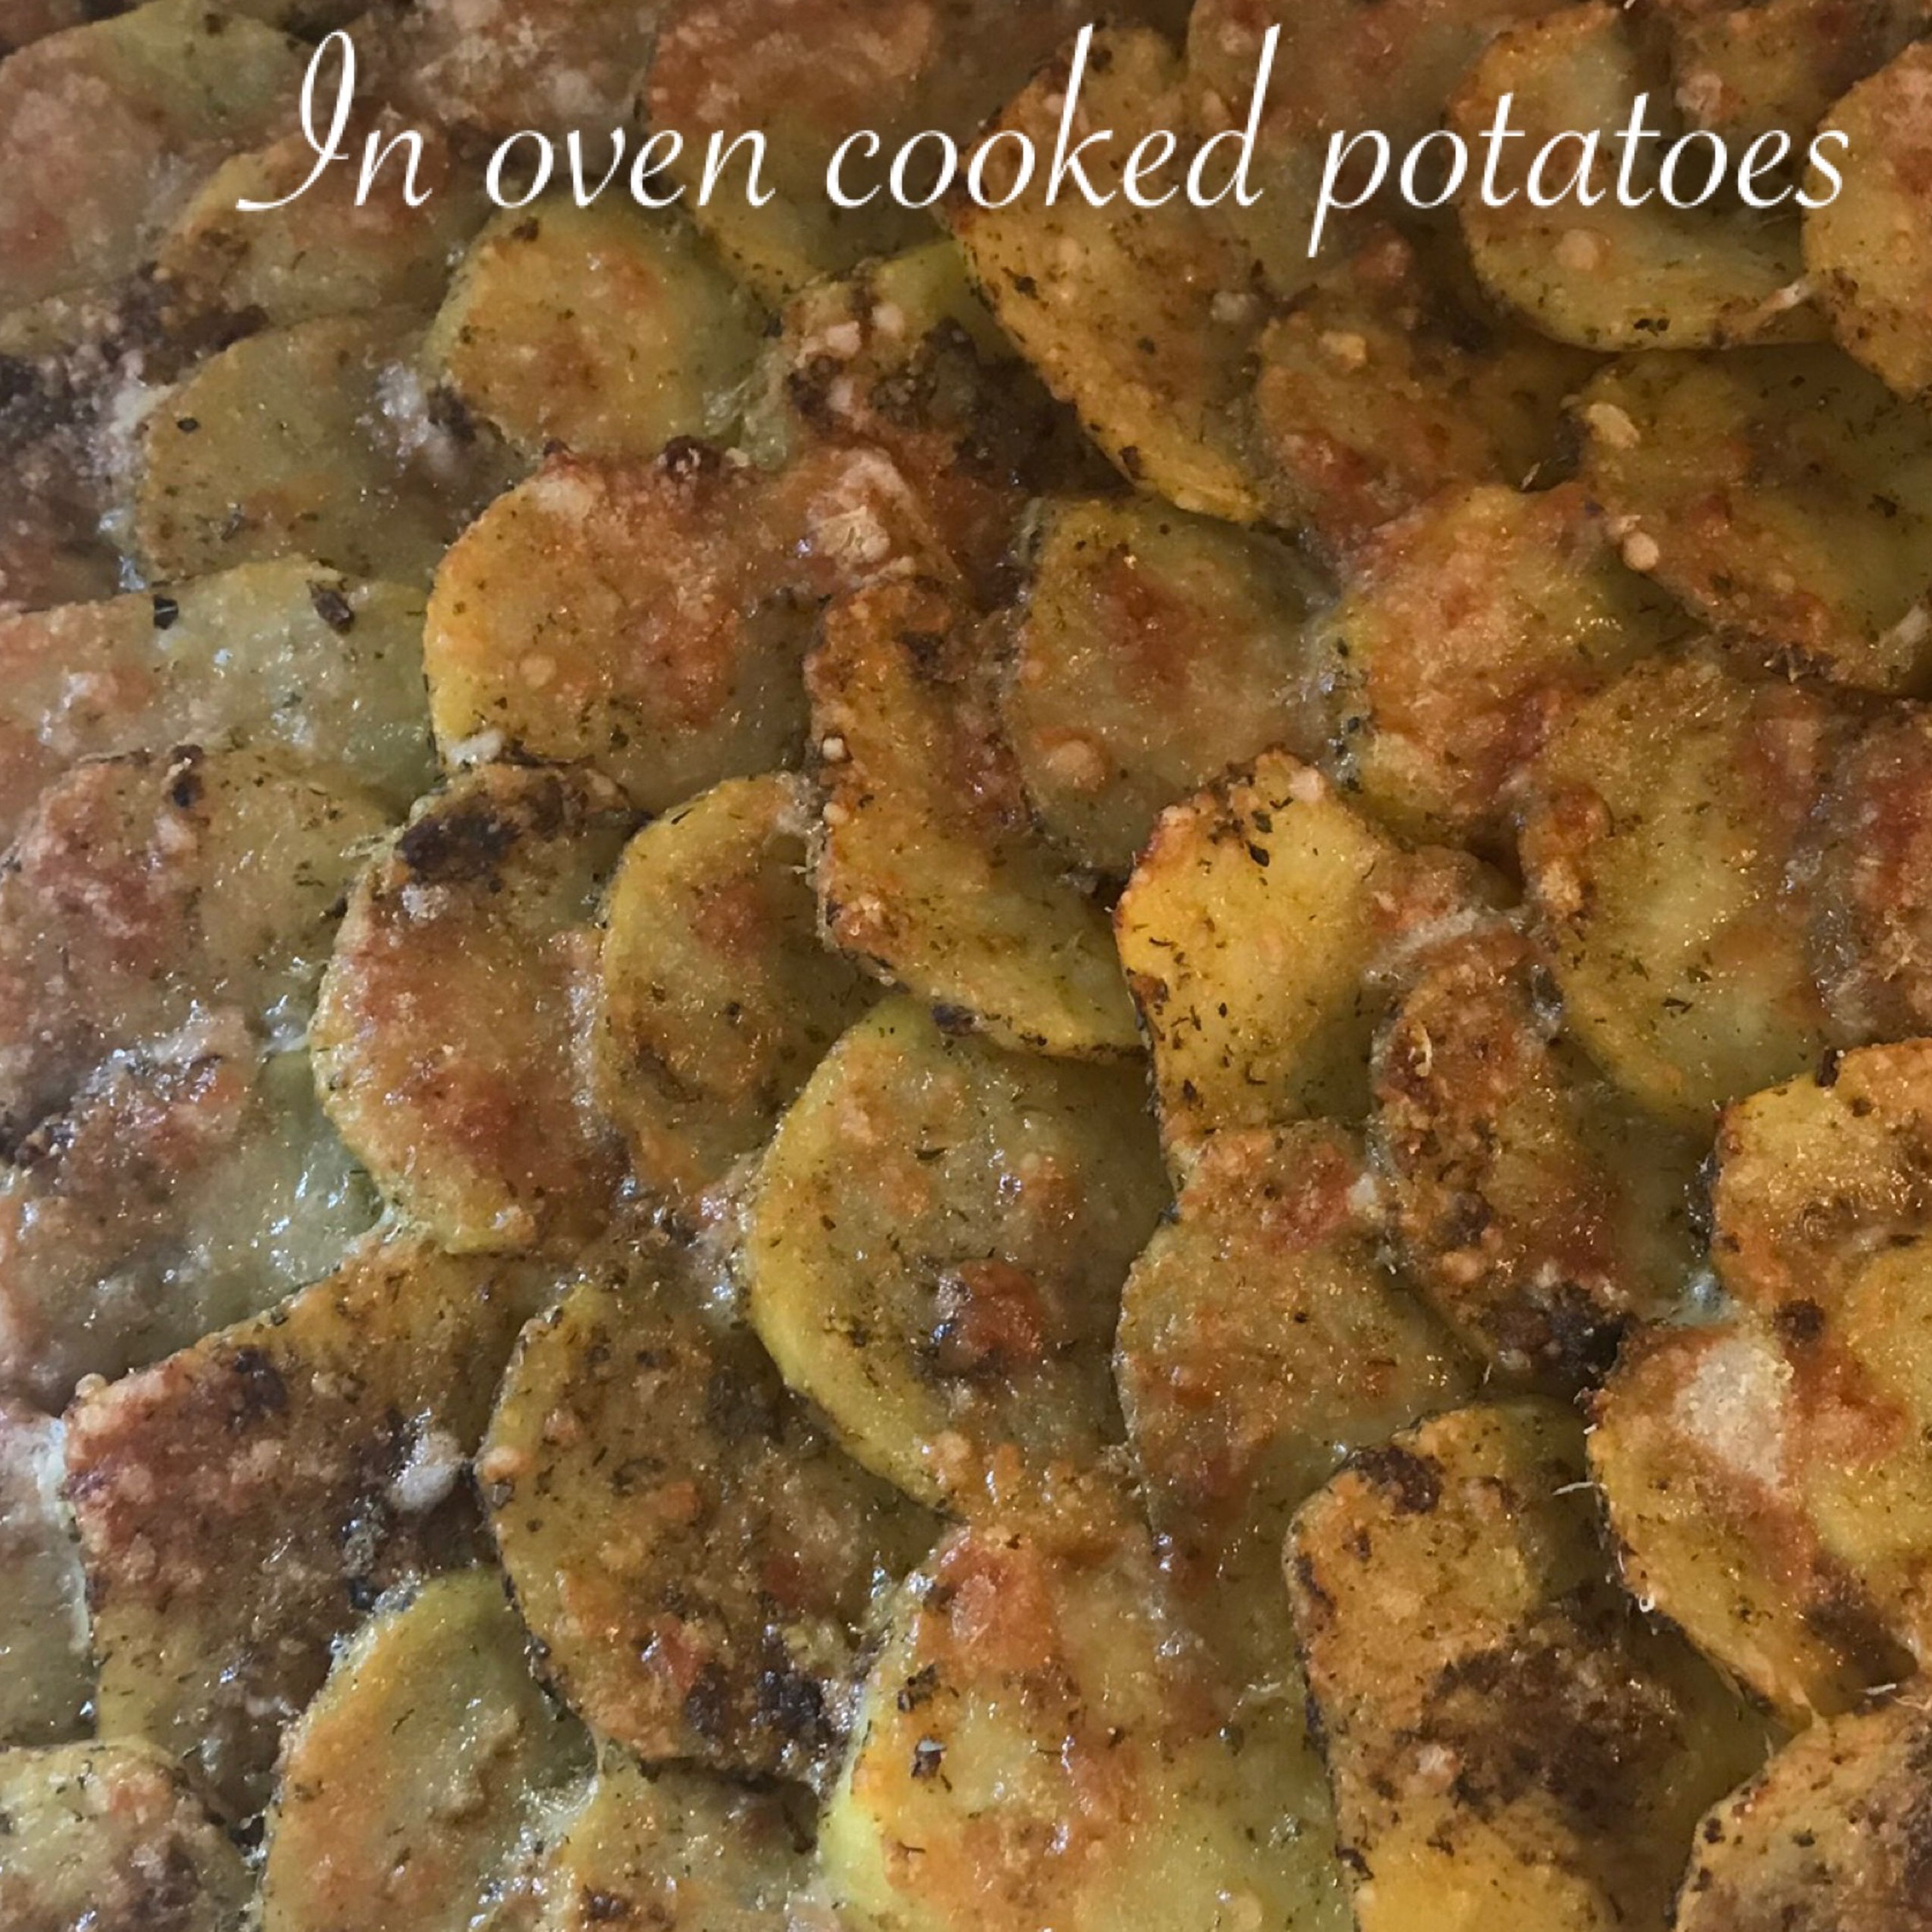 Slice potatoes in thin slices, add your favourite spices. Preheat oven to 200 temperature, take baking tray and nicely put all potatoes slices, make it like carpet without holes, on top add Parmesan cheese and put in oven for 15-20min.